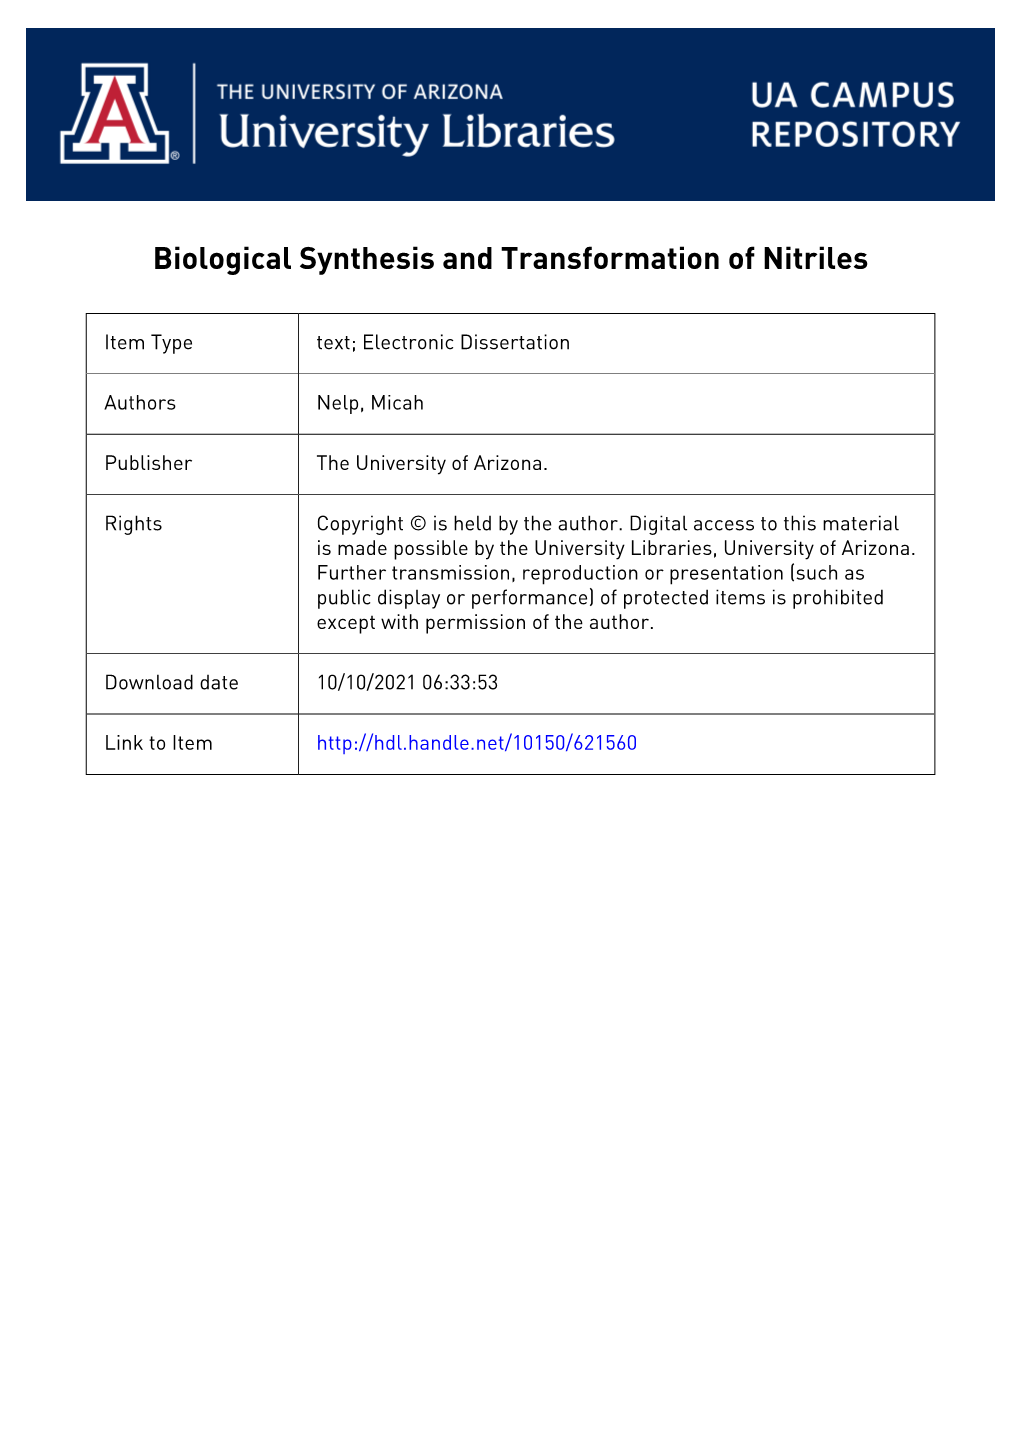 1 Biological Synthesis and Transformation of Nitriles